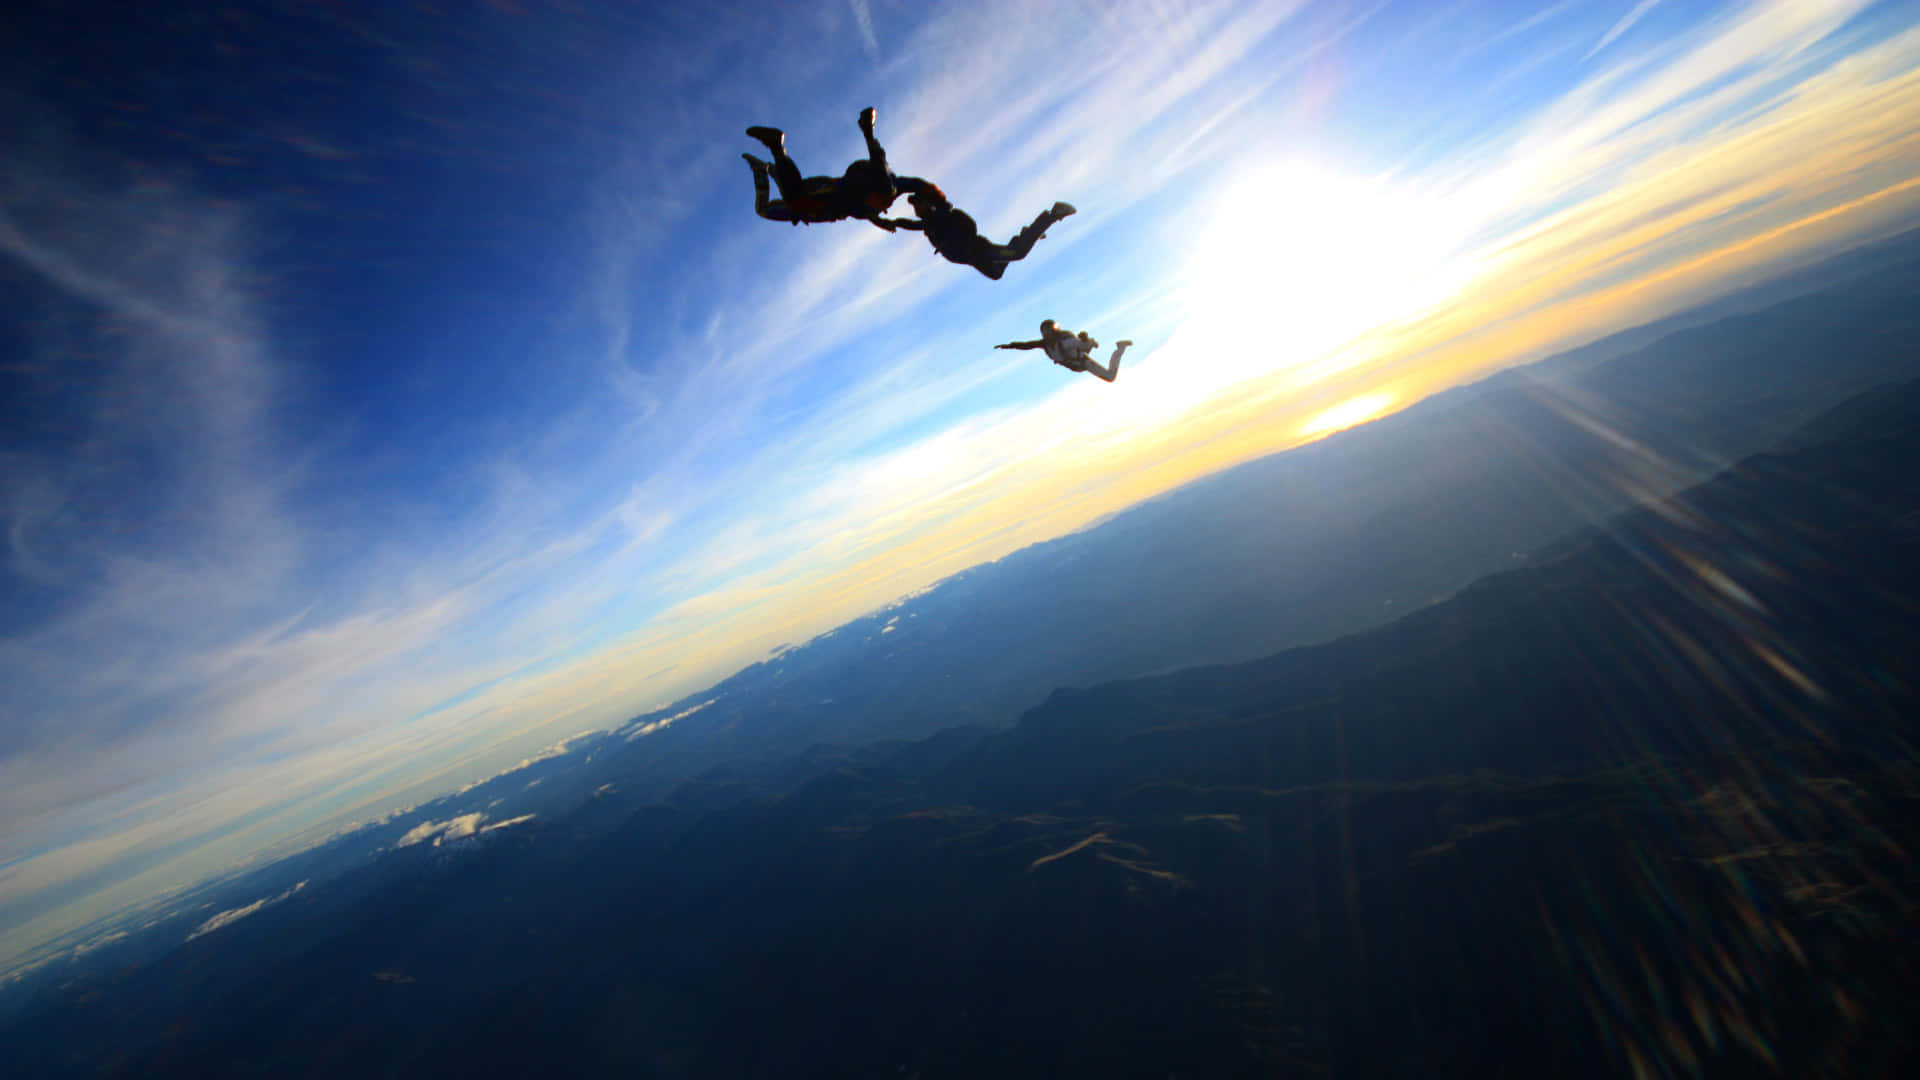 Free Skydiving Wallpaper Downloads, [100+] Skydiving Wallpapers for FREE |  